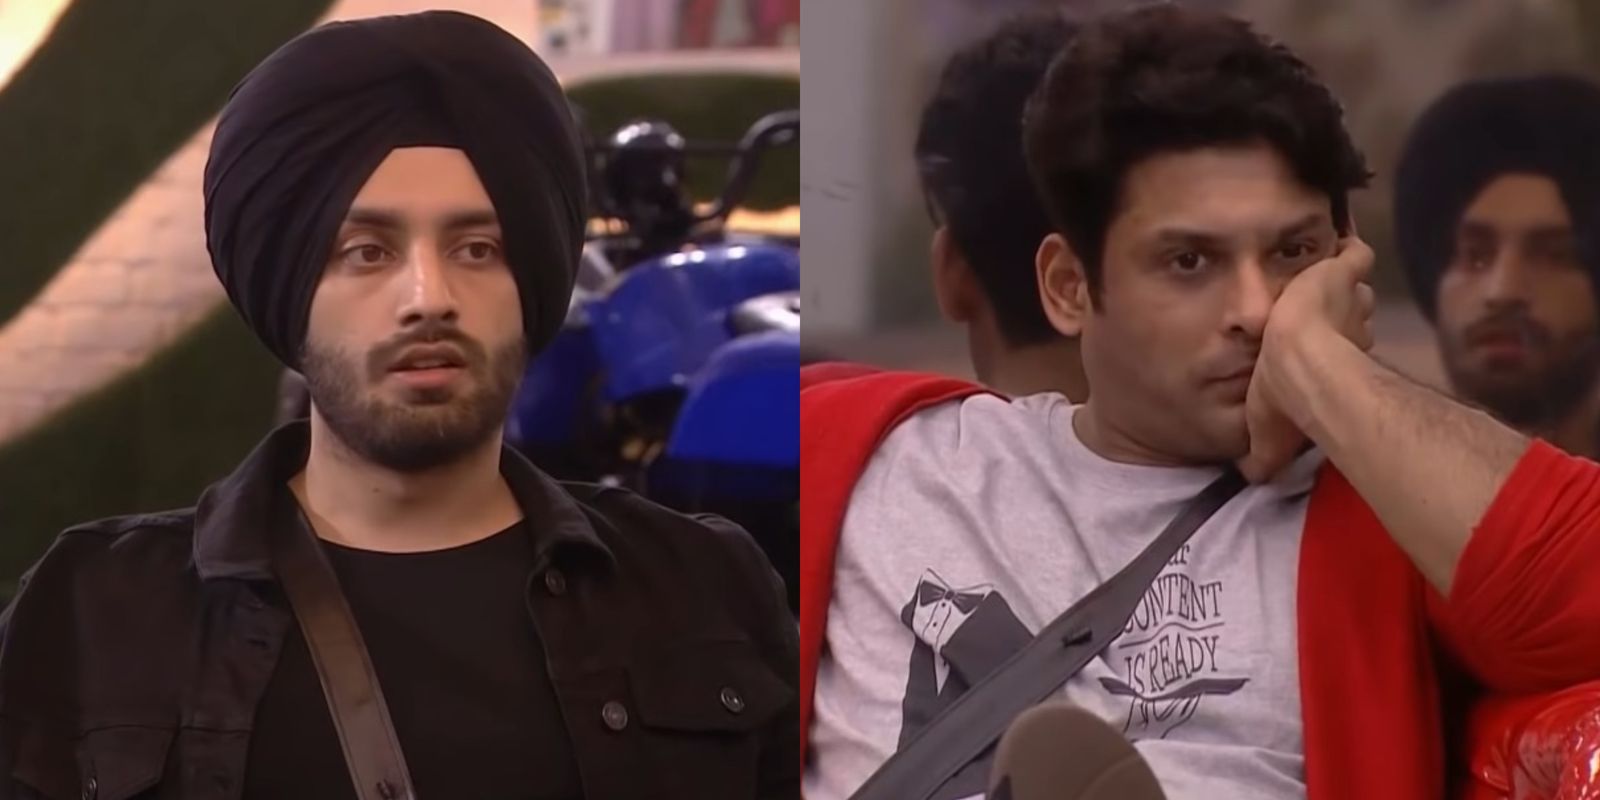 Bigg Boss 14’s Shehzad On Verbal Spat With Sidharth Shukla: ‘It Was Not His Place To Make Personal Comments’